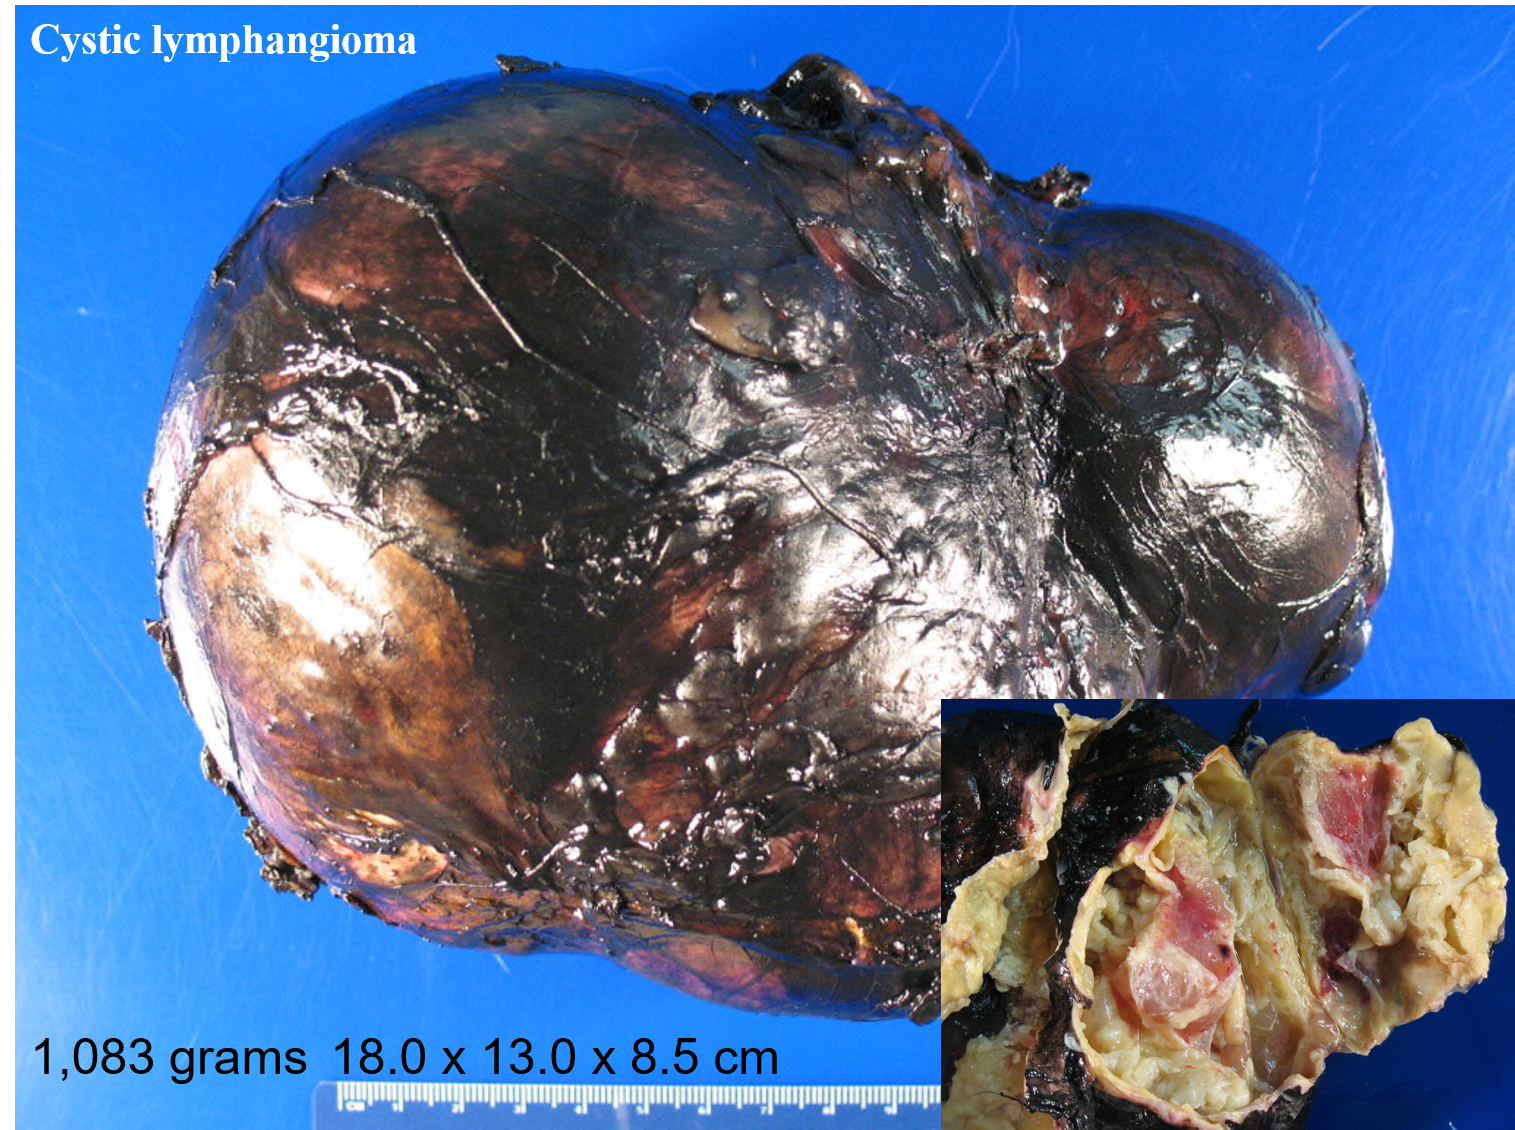 A huge cystic lymphangioma arising from the right adrenal gland. Dr. Carling removed it and it weighed close to 2.5 lbs.